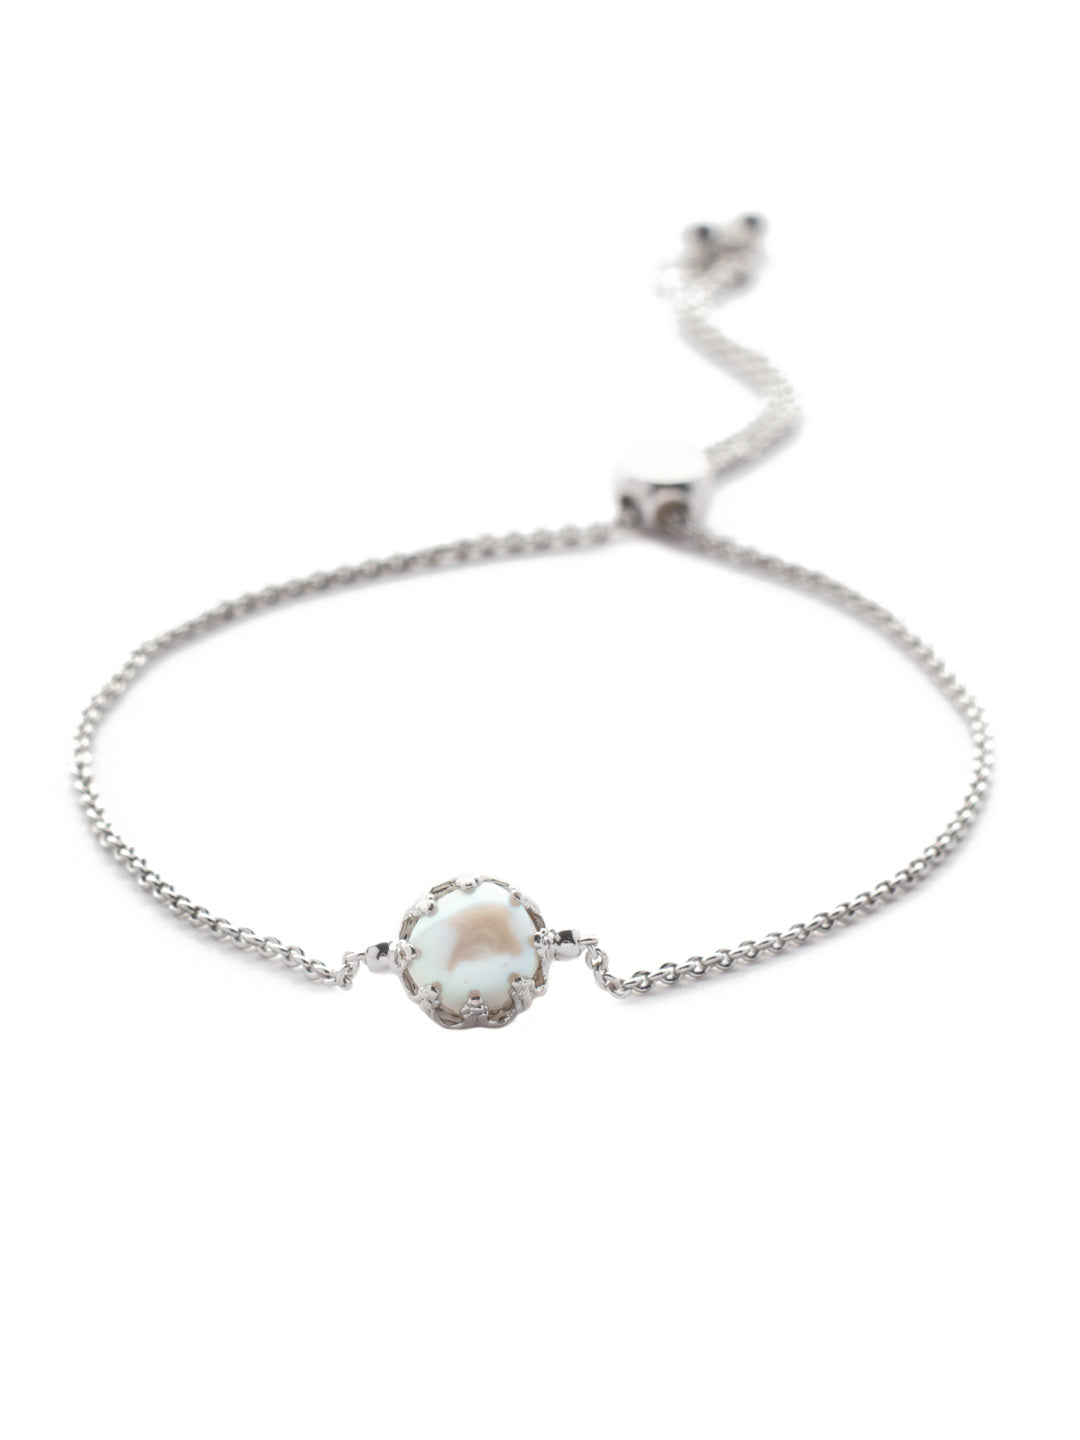 Aida Slider Bracelet - BEV155PDCRY - <p>The Aida Slider Bracelet features a single freshwater pearl on an adjustable slider chain. The dainty design makes it perfect for layering! From Sorrelli's Crystal collection in our Palladium finish.</p>